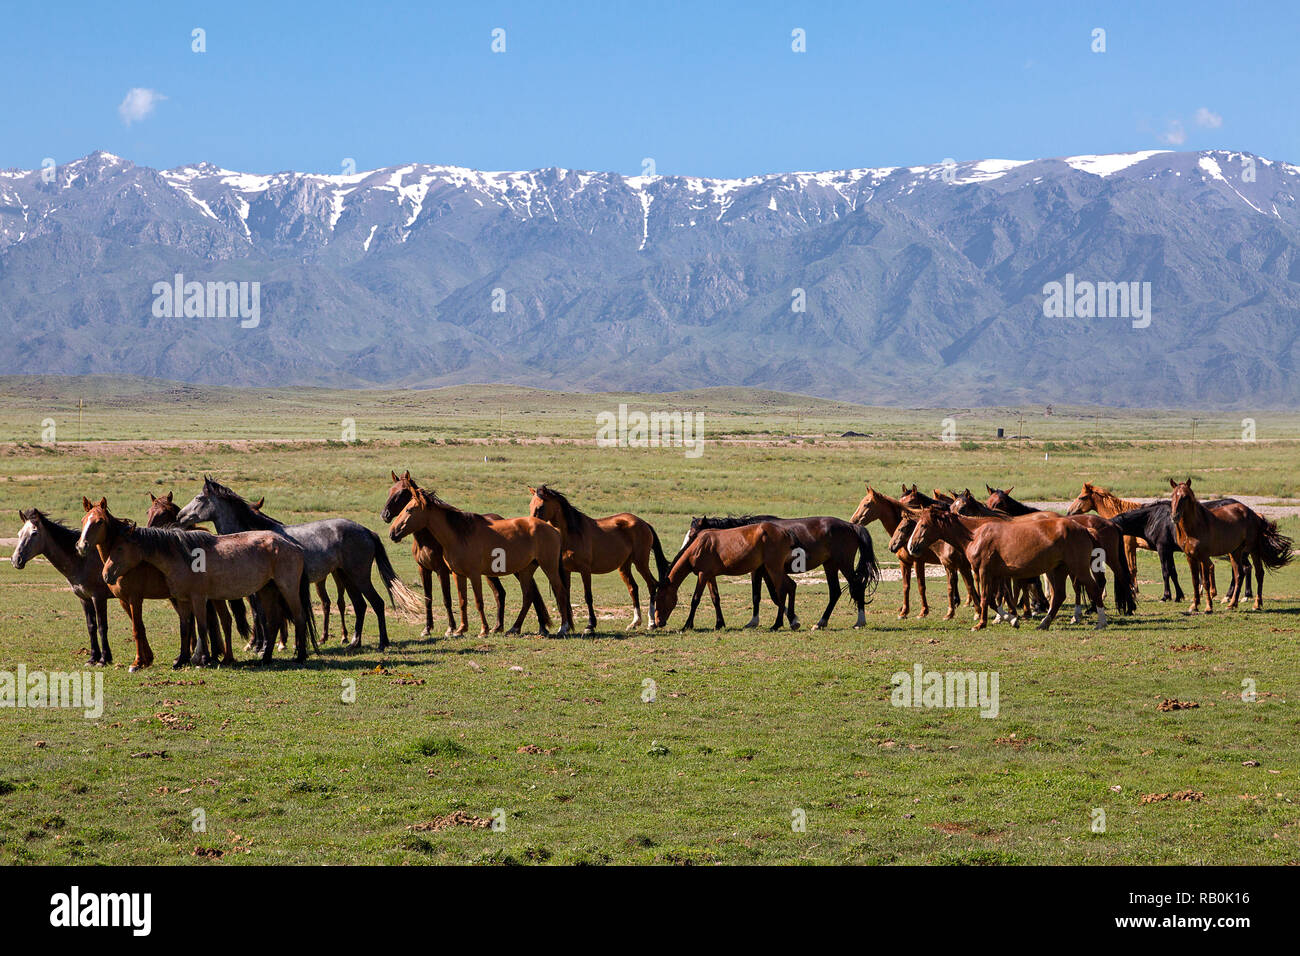 Horses with snow capped mountains in the background, in Kazakhstan. Stock Photo